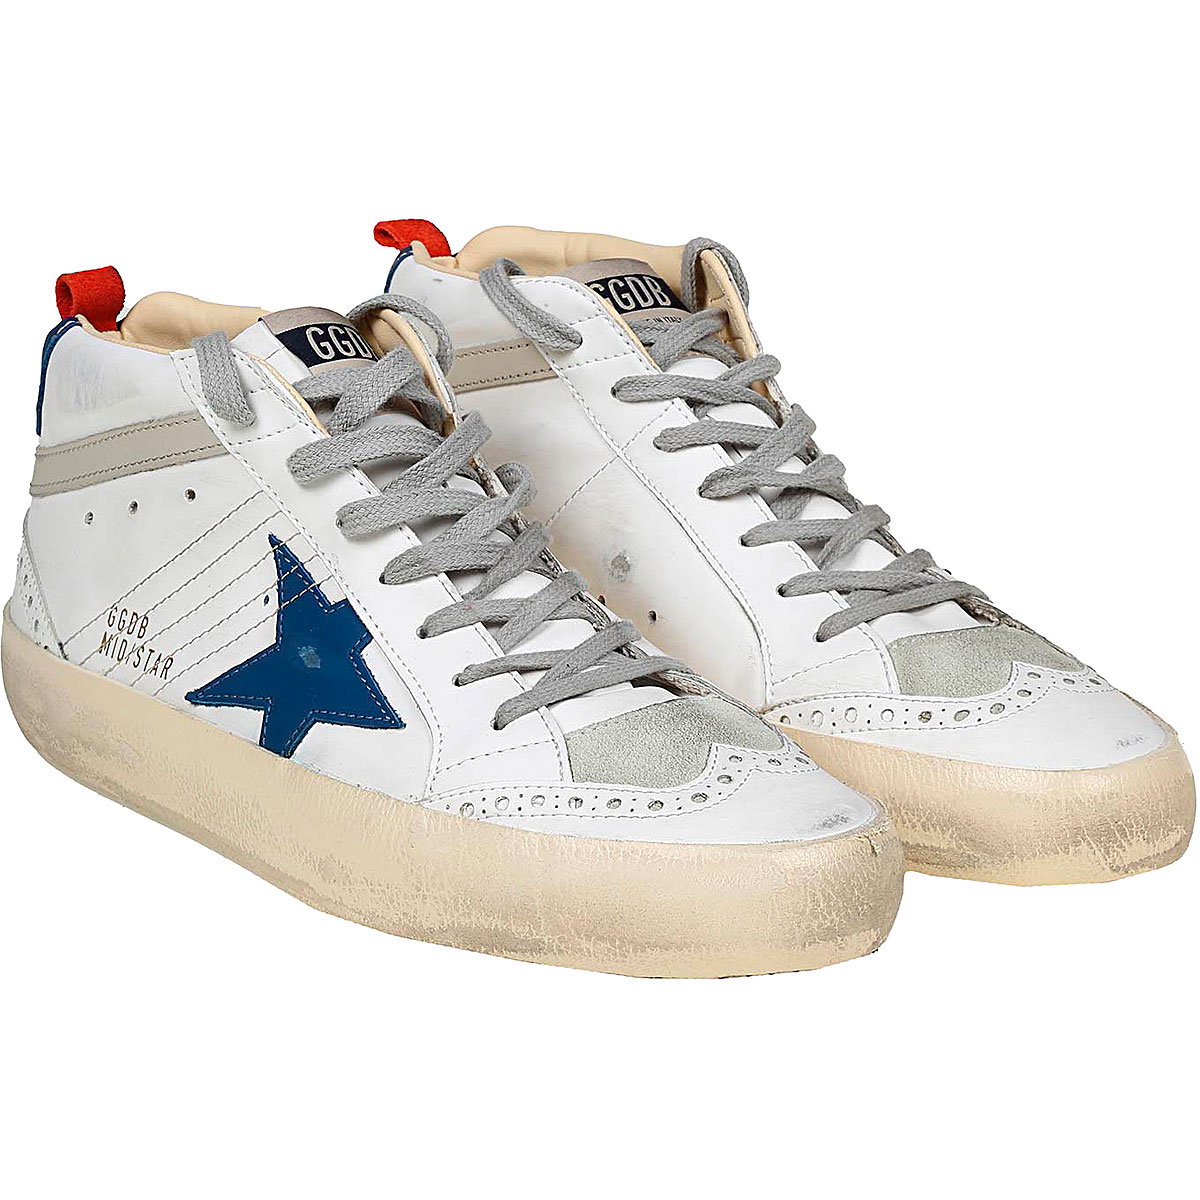 Mens Shoes Golden Goose, Style code: gmf00122-f004765-82374